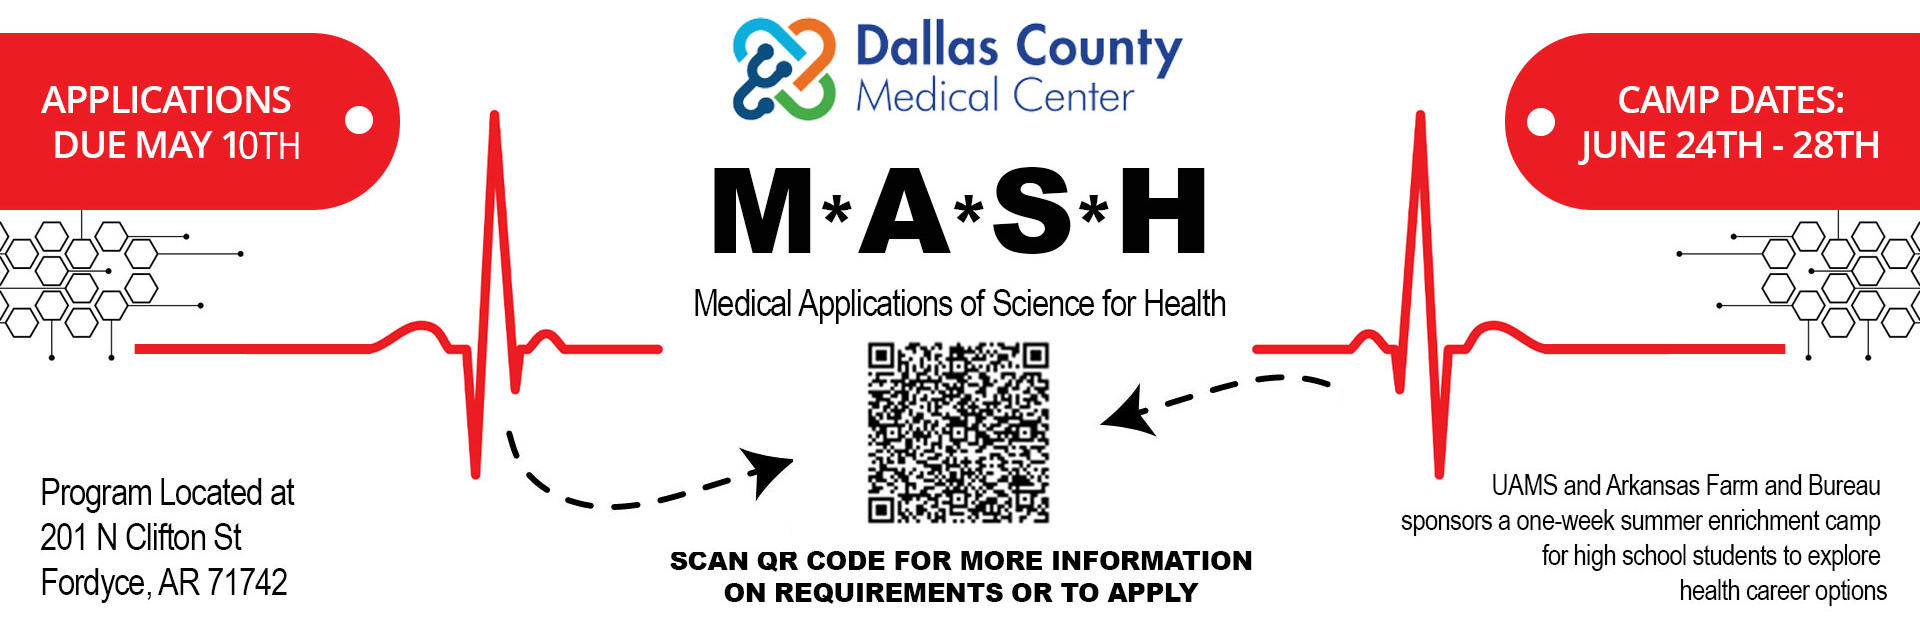 MASH program on June 24th-28th
(Medical Applications of Science for Health)

SCAN QR CODE FOR MORE INFORMATION ON REQUIREMENTS OR TO APPLY

UAMS and Arkanas Farm and Bureau sponsors a one-week summer enrichement camp for high school students to explore health career options

Program Located at 
201 N Clifton St.
Fordyce, ARK 71742 


Applications Due May 1st